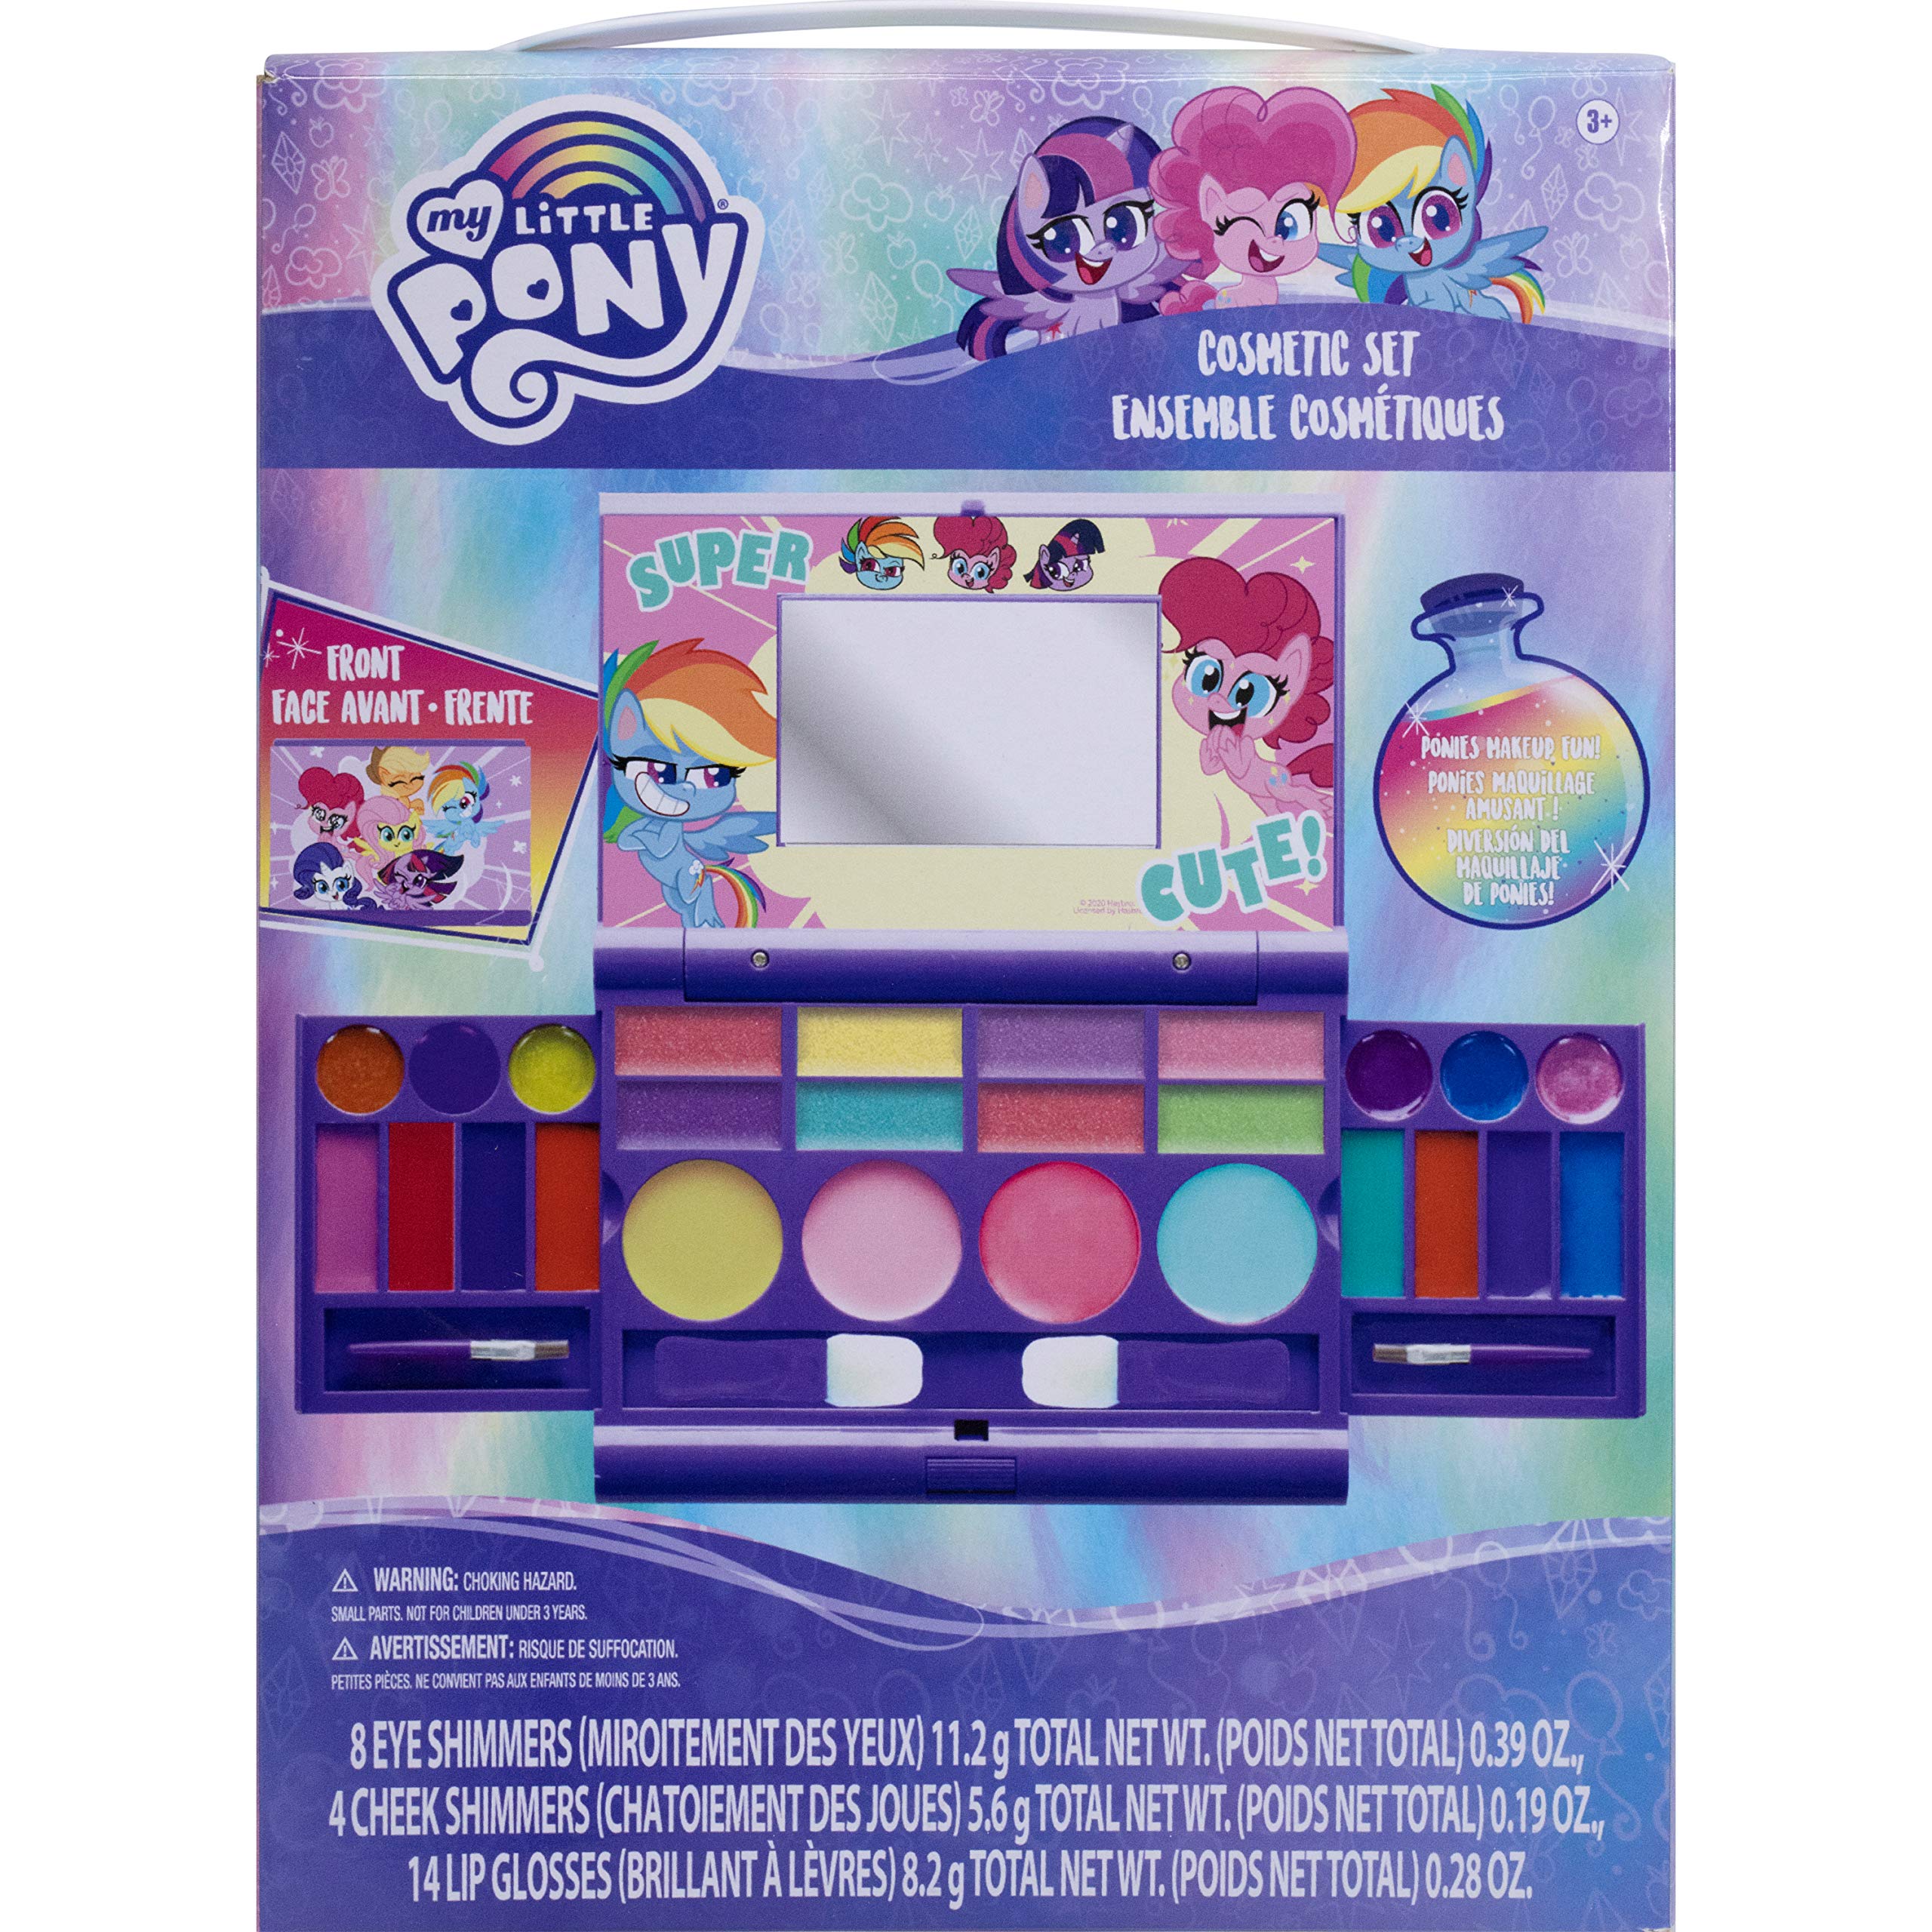 Townley Girl My Little Pony Hasbro Cosmetic Compact Set with Mirror 14 Lip glosses, 4 Cheek Shimmers, 8 Eye Shimmer Portable Foldable Washable Make Up Beauty Kit Box Toy Set for Girls & Kids